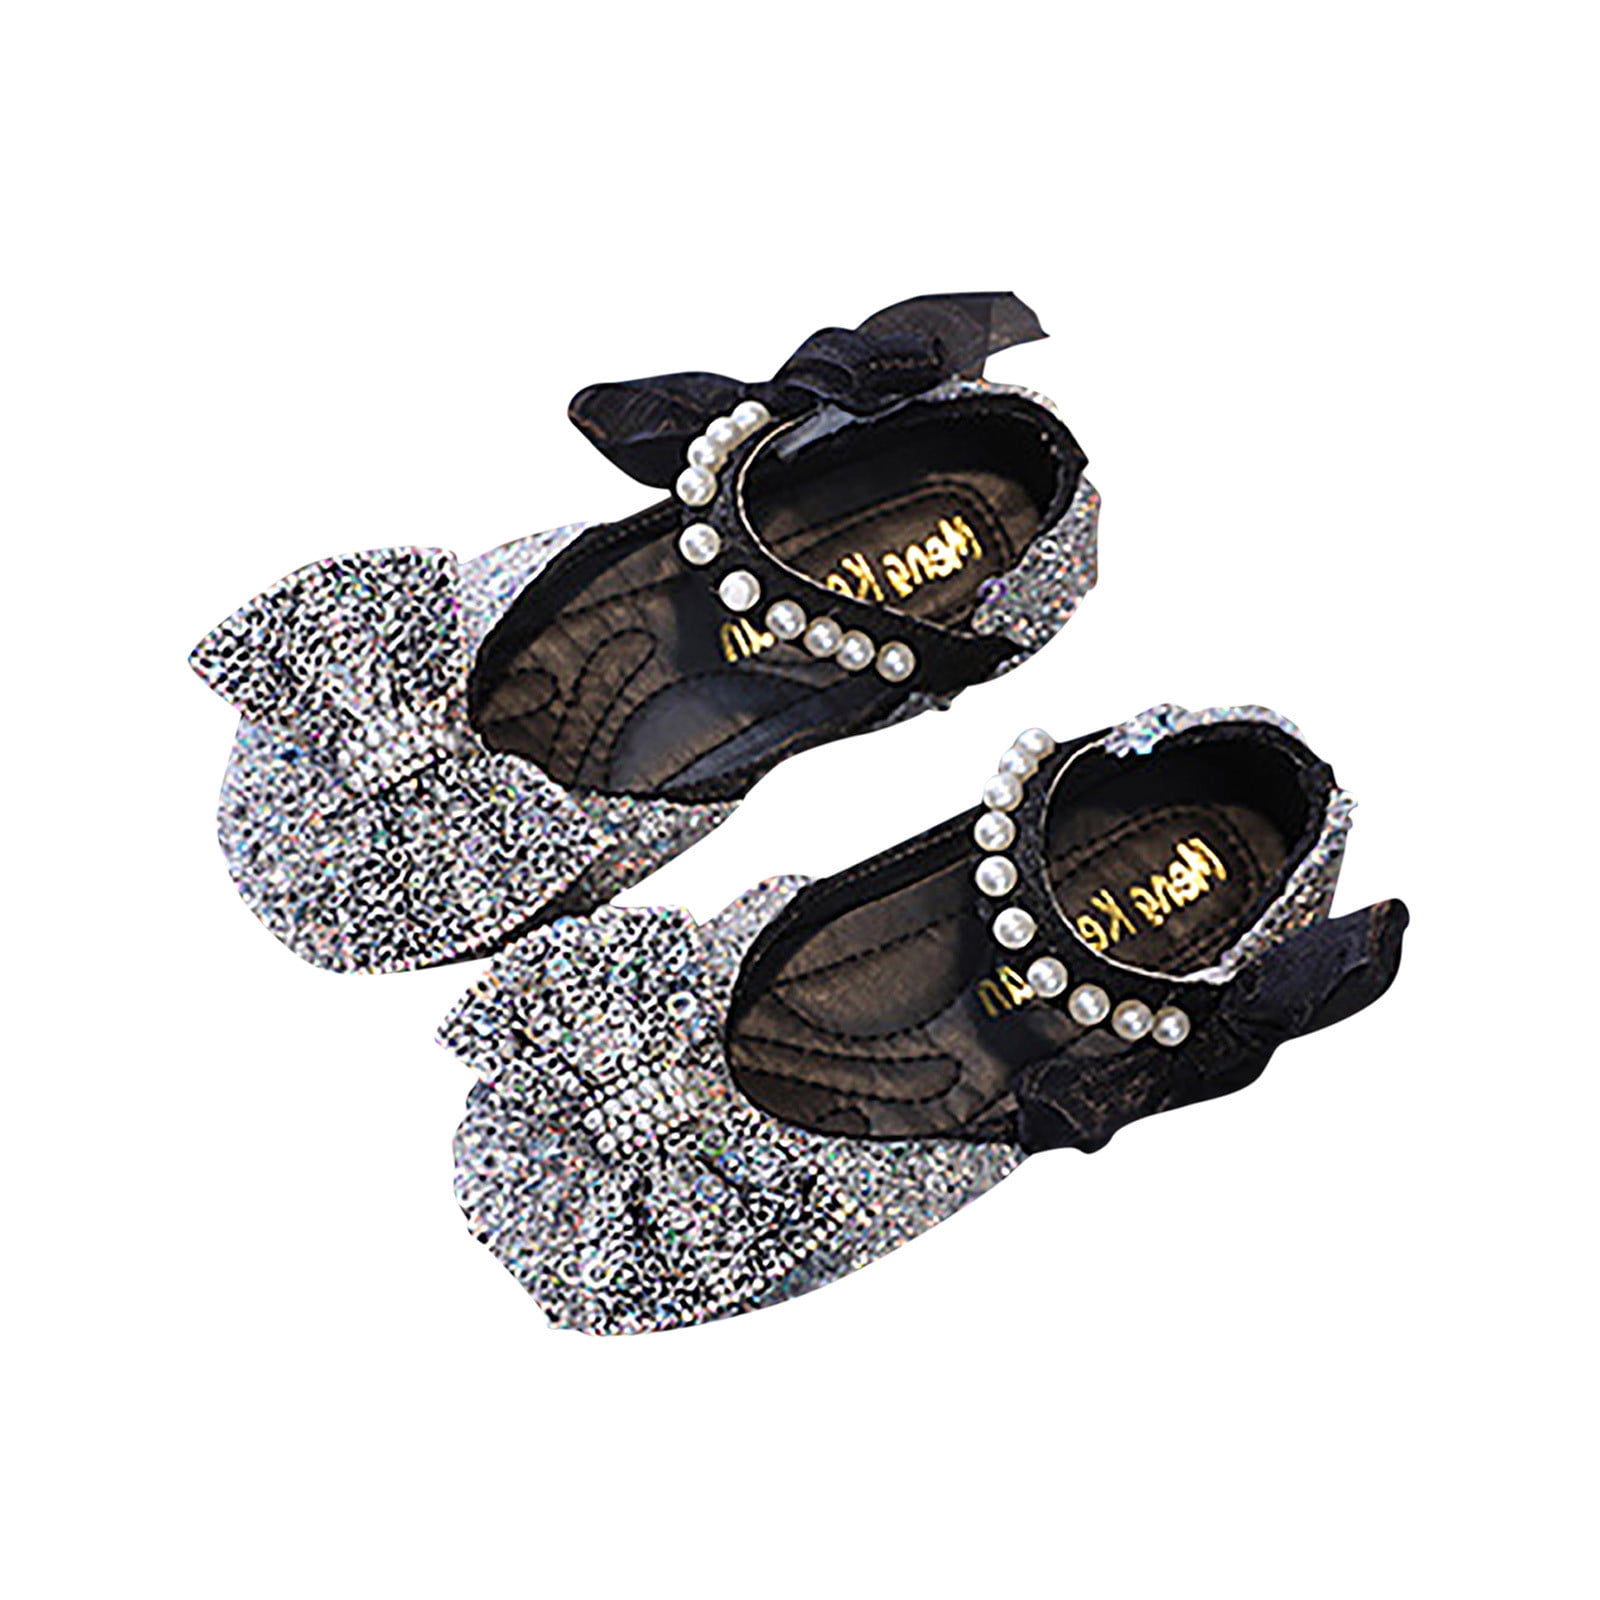 CFXNMZGR girls sandals performance dance shoes for girls childrens shoes pearl  rhinestones shining kids princess shoes baby girls shoes for party and  wedding 